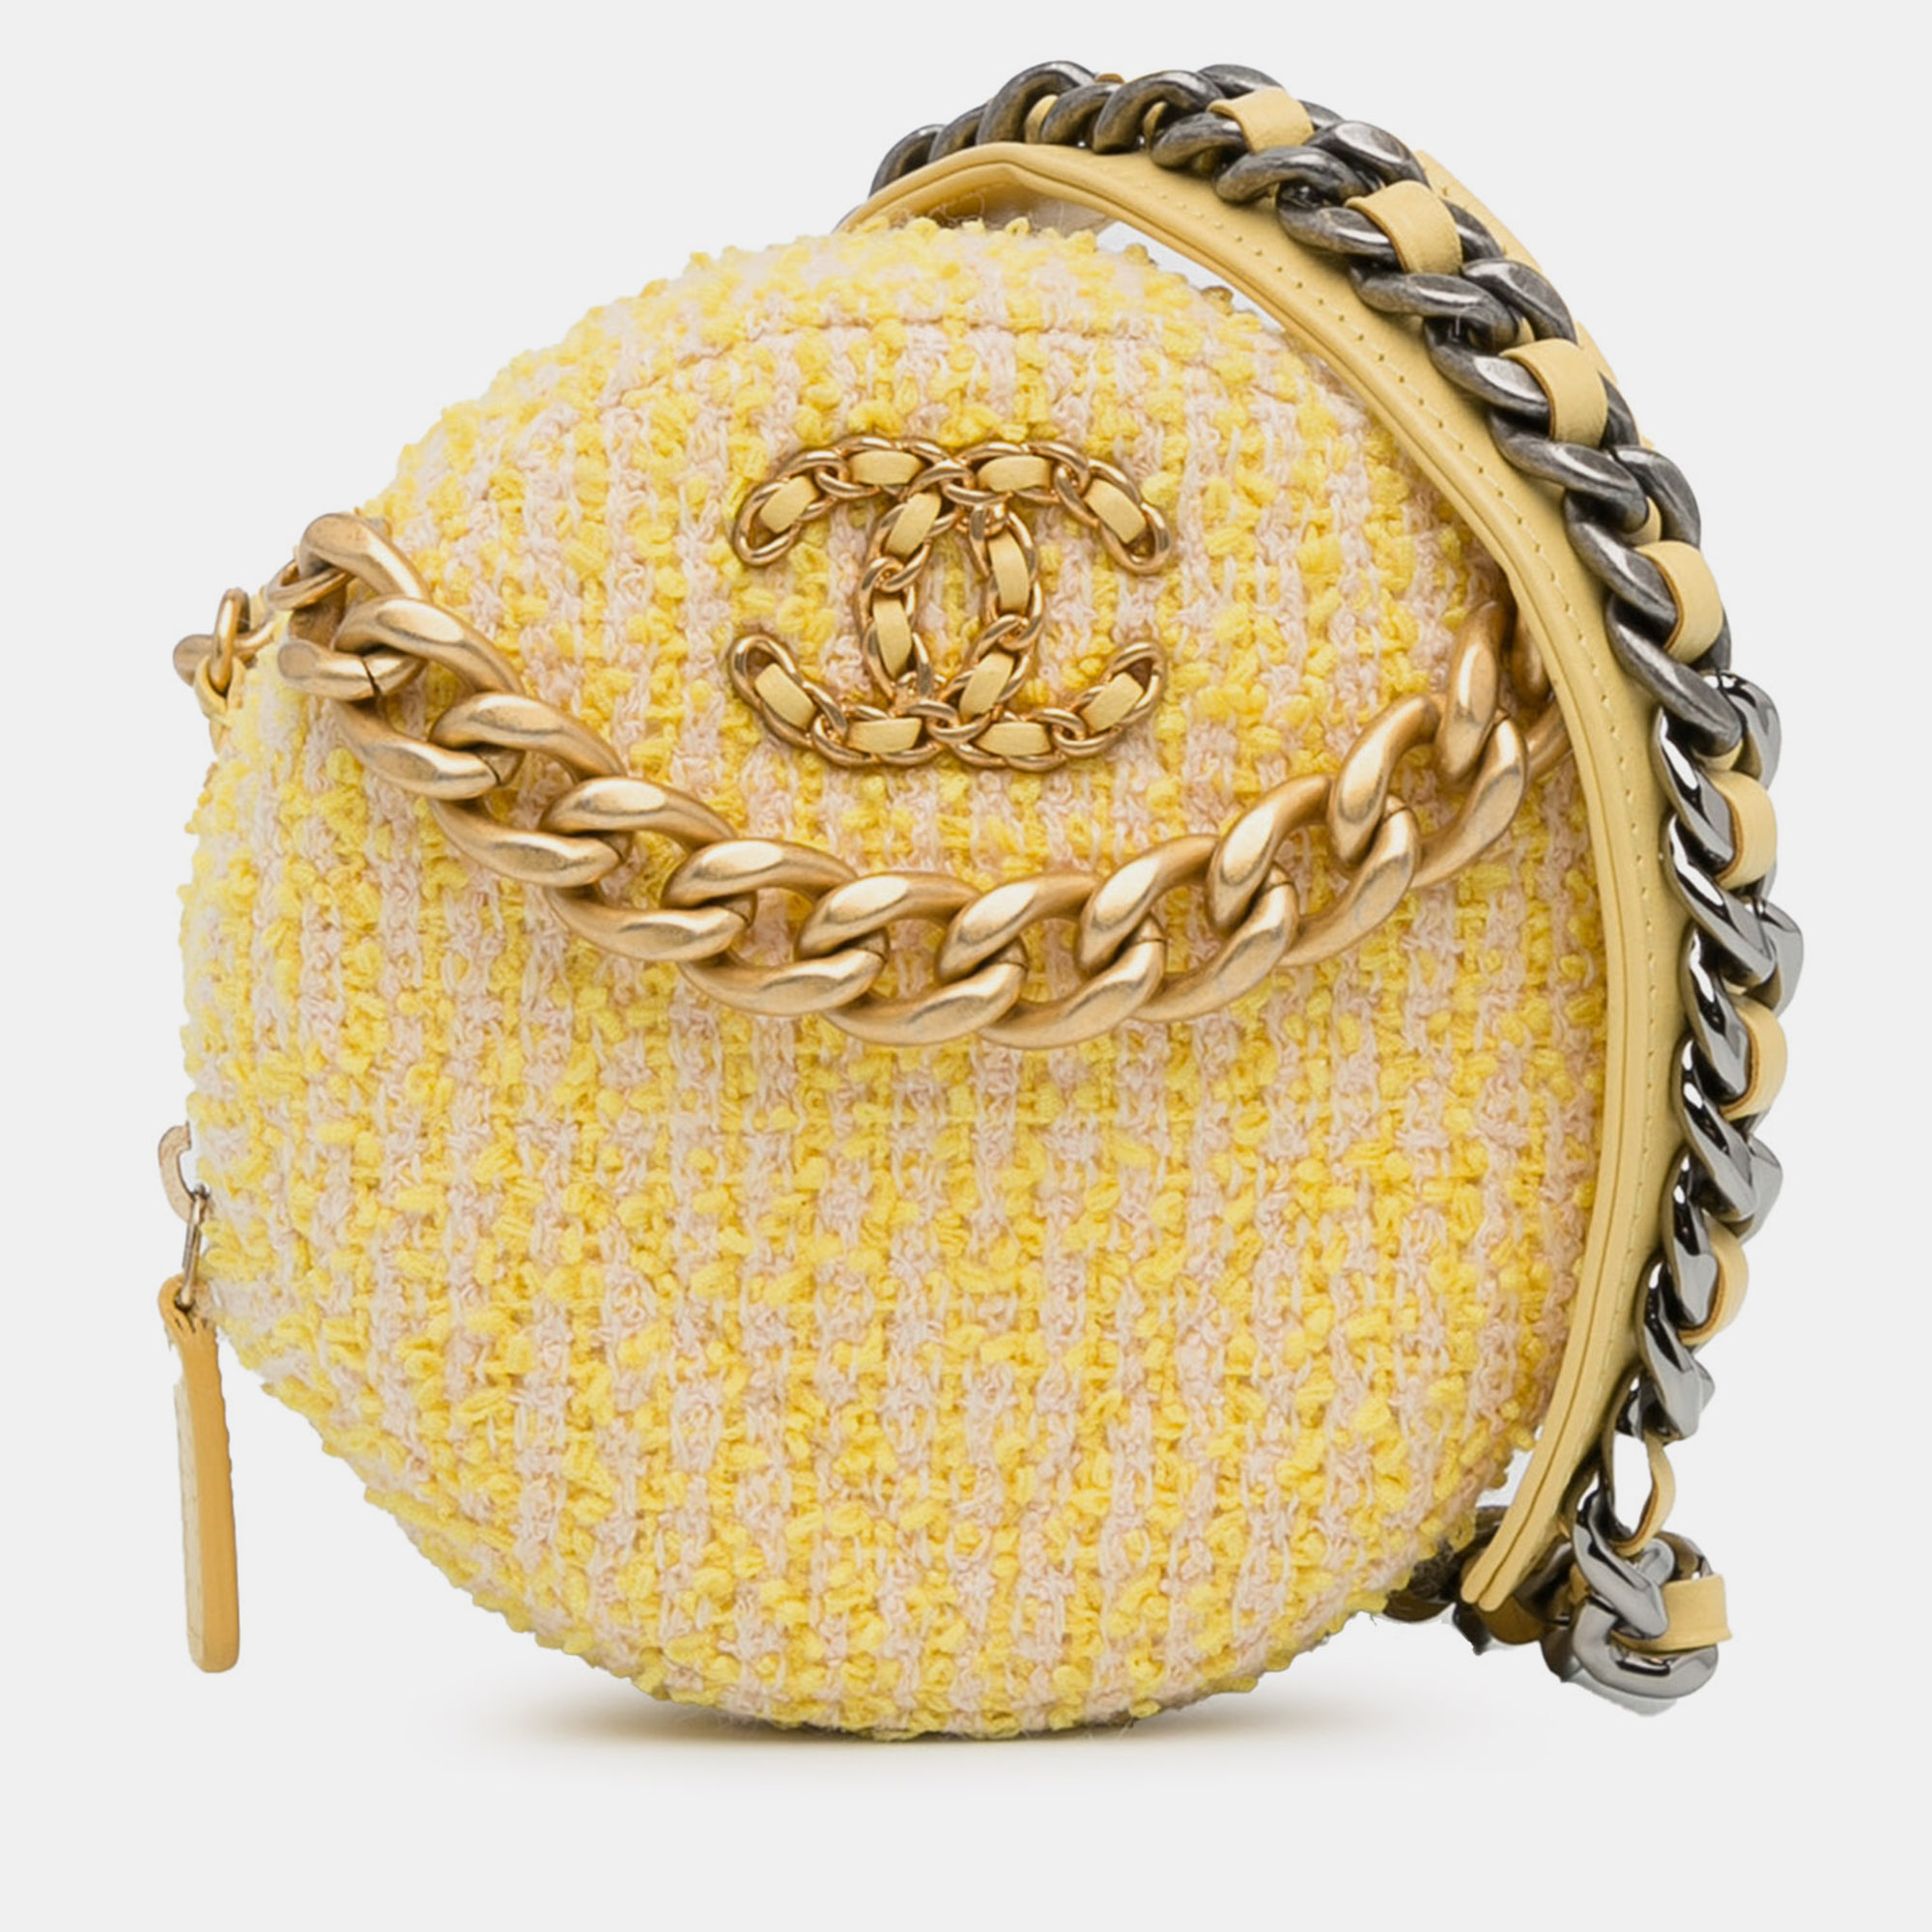 Chanel tweed 19 round clutch with chain